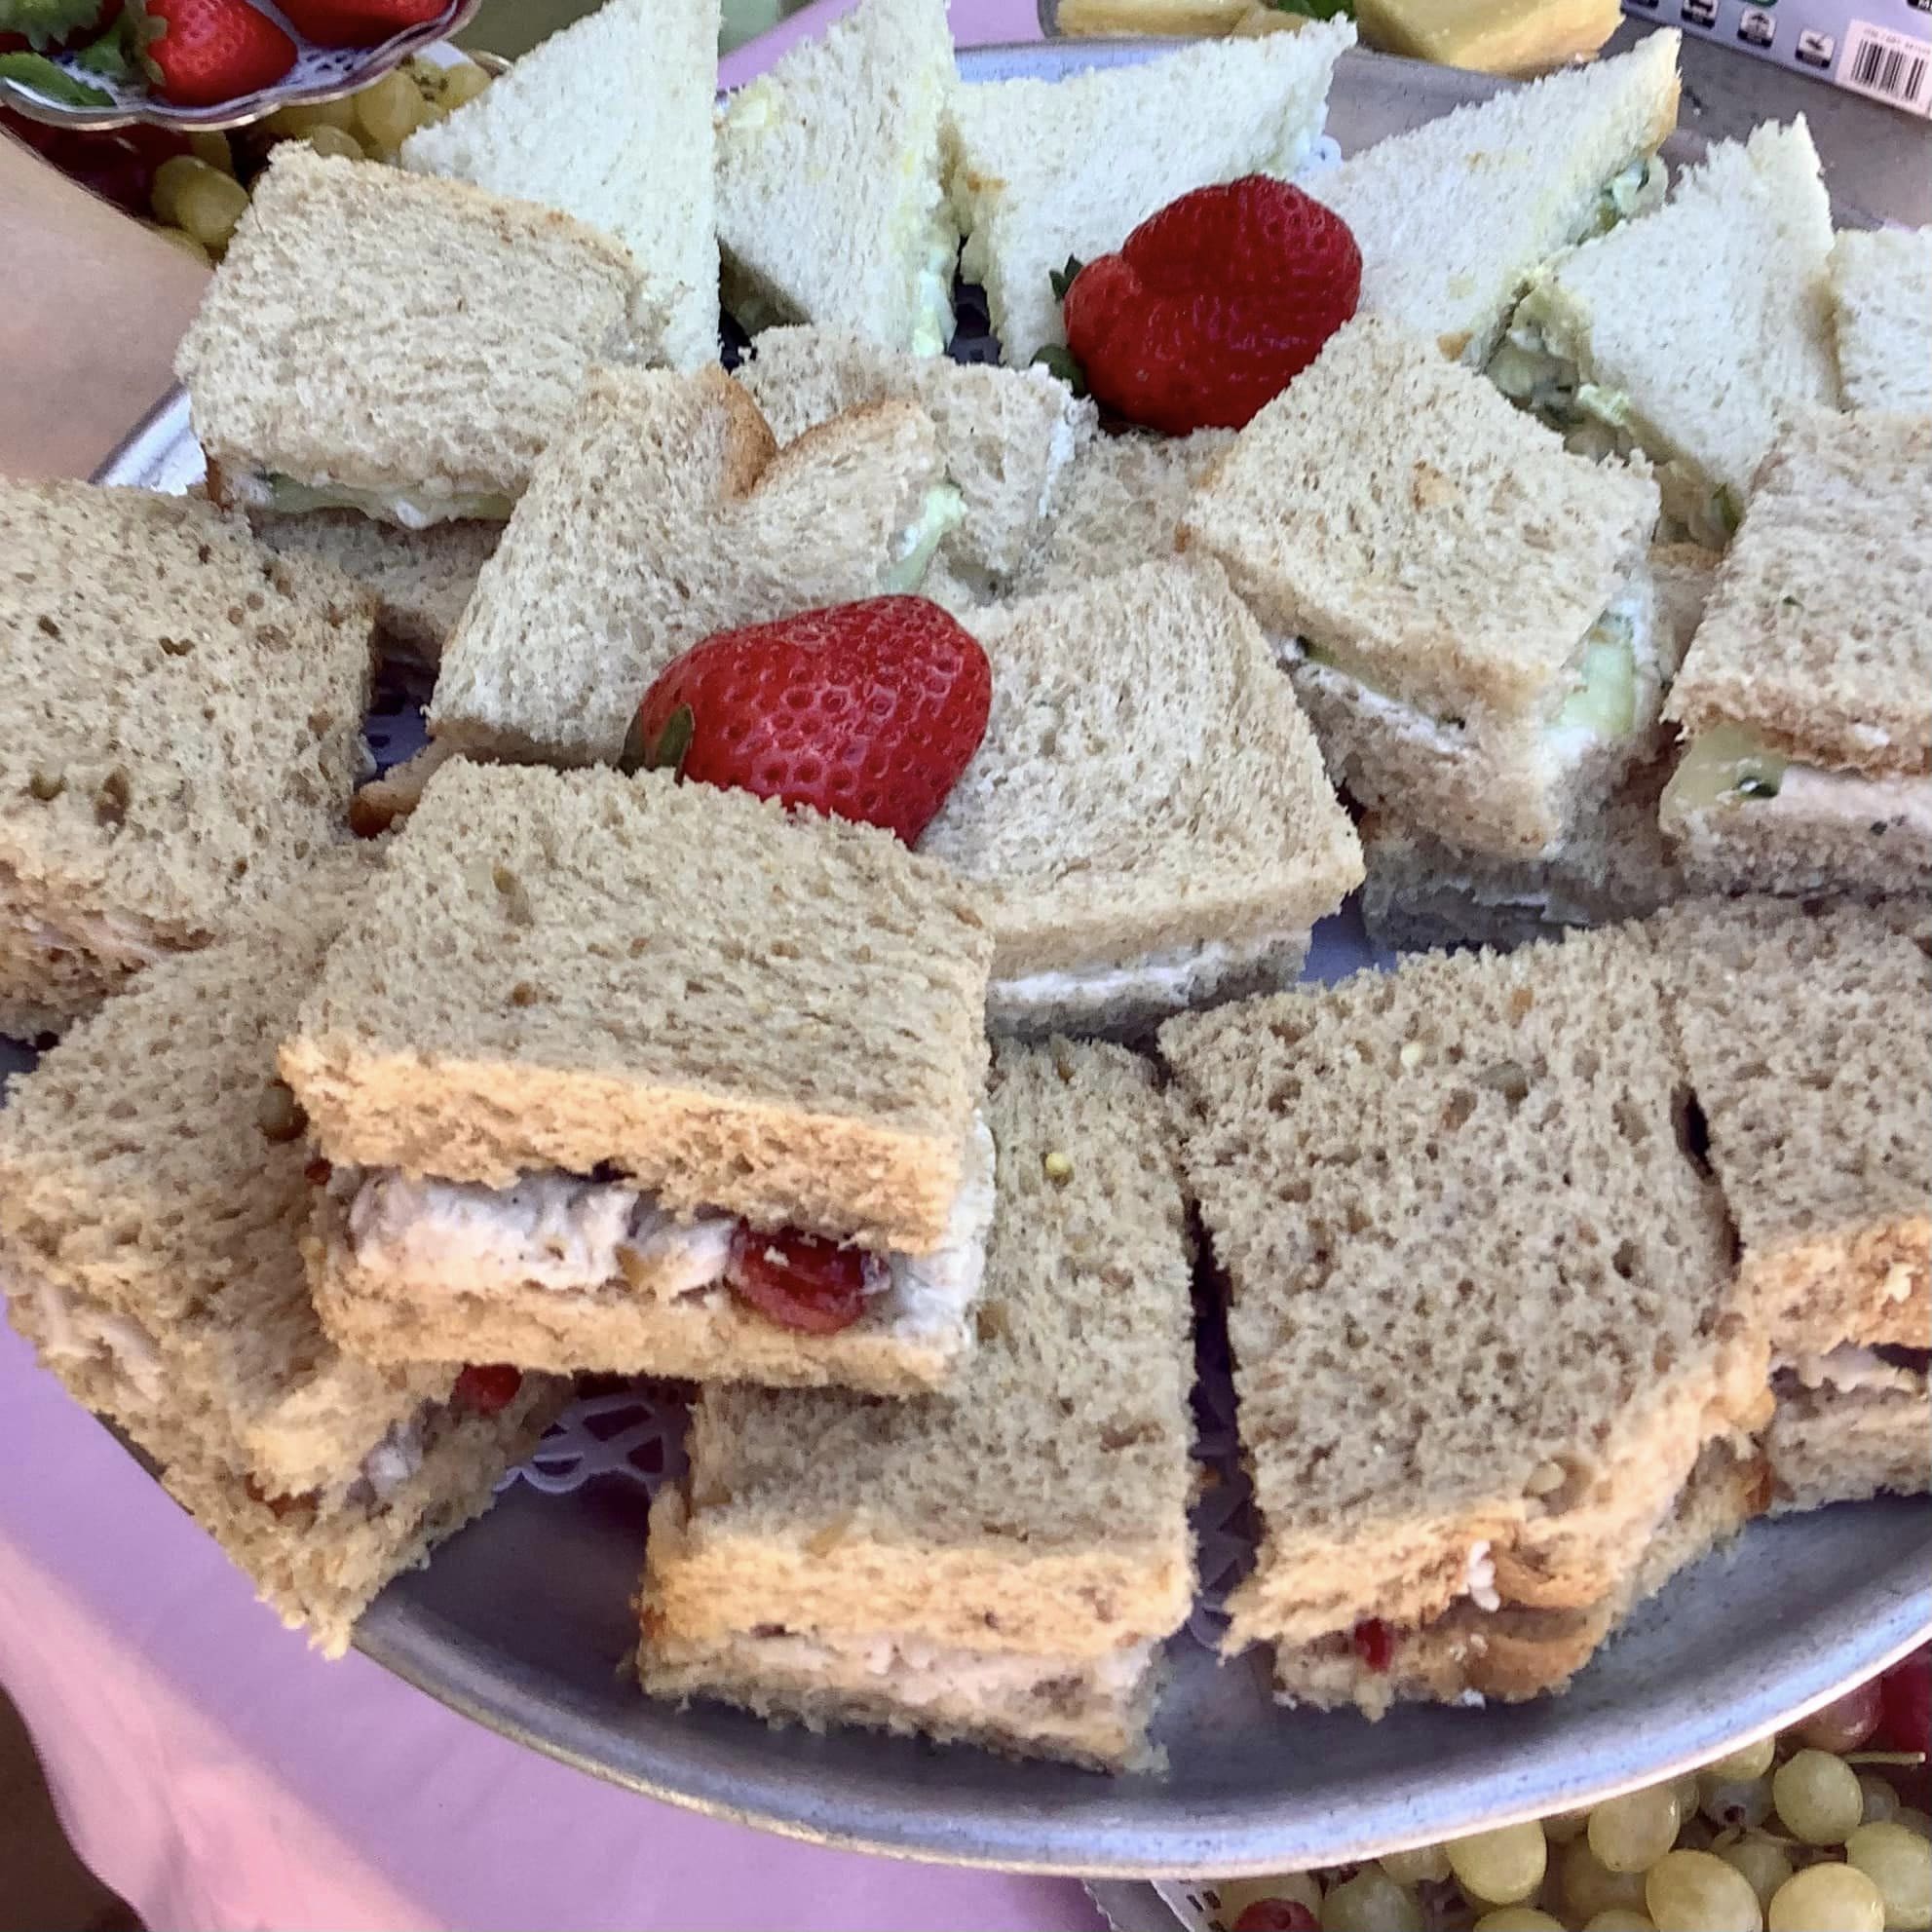 A plate of assorted sandwiches, some made with white bread and others with whole wheat, garnished with strawberries.